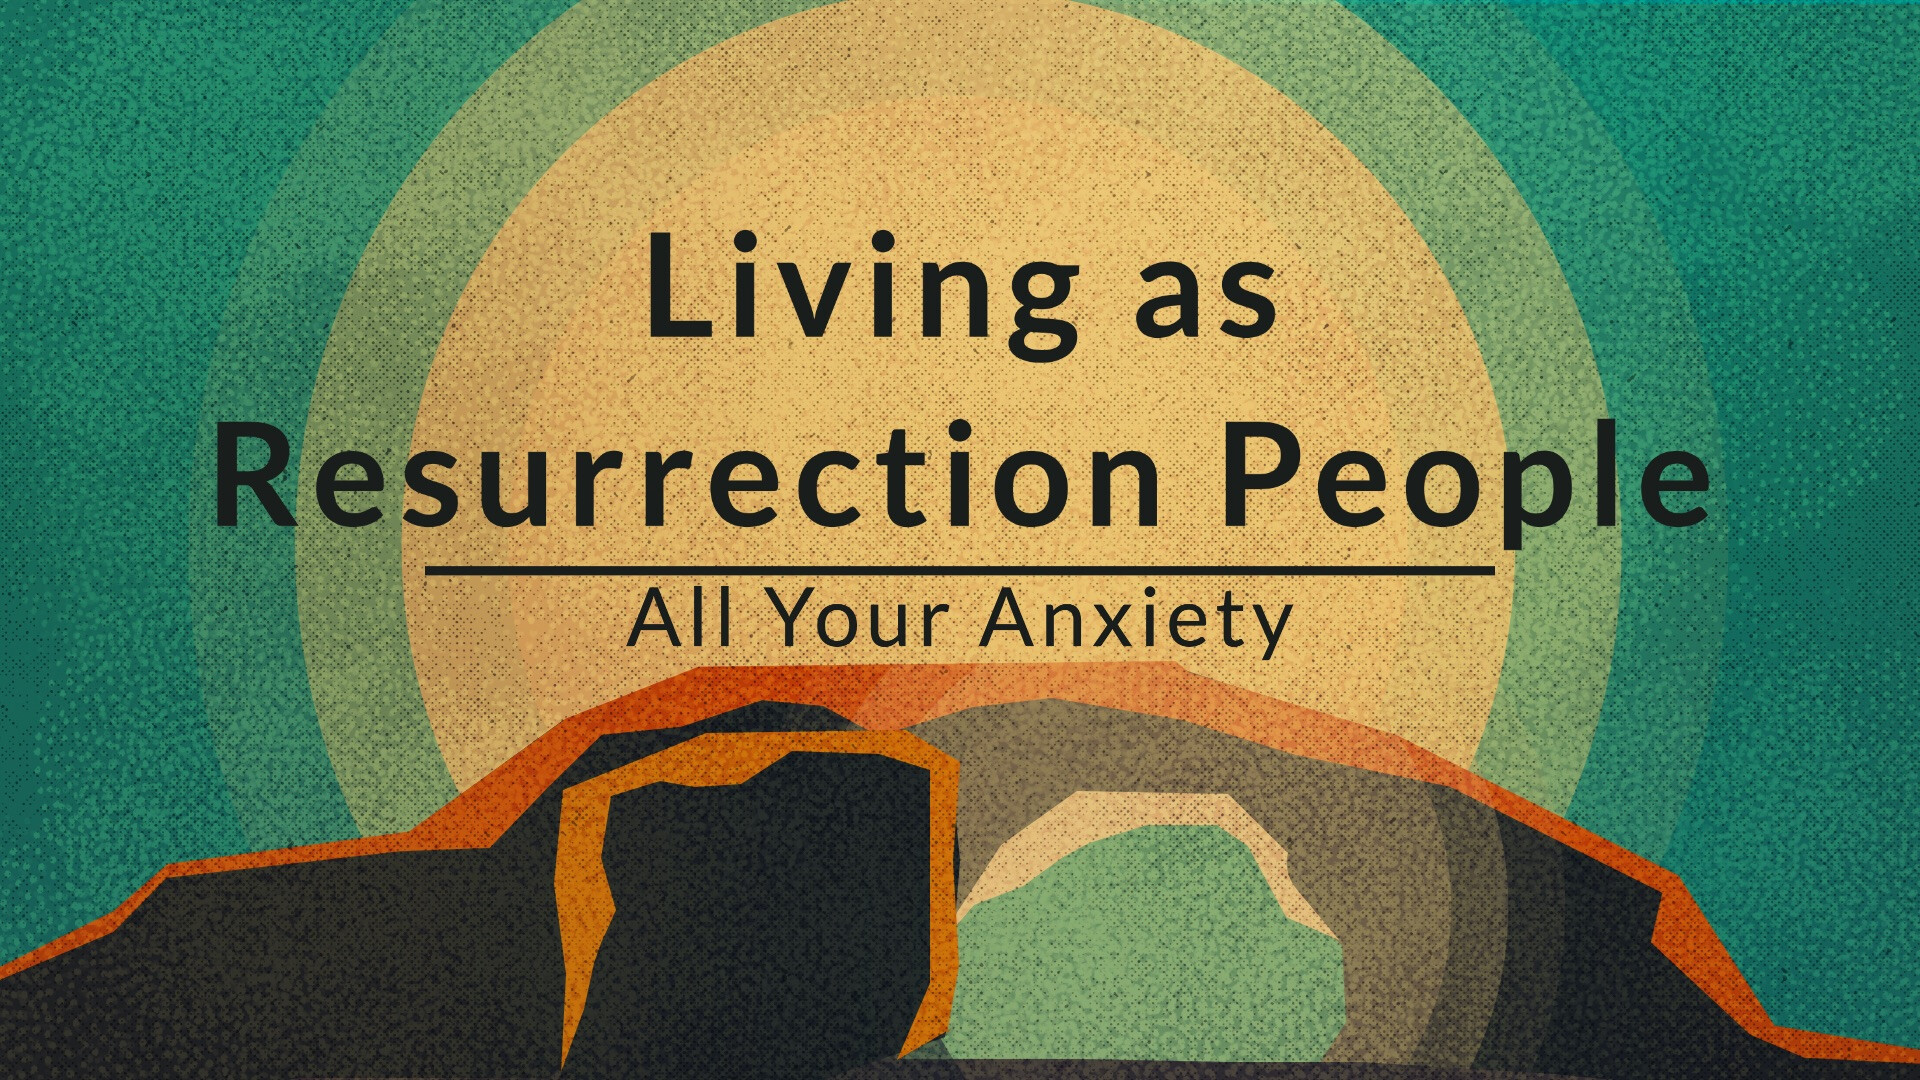 LIVING AS RESURRECTION PEOPLE: ALL YOUR ANXIETY